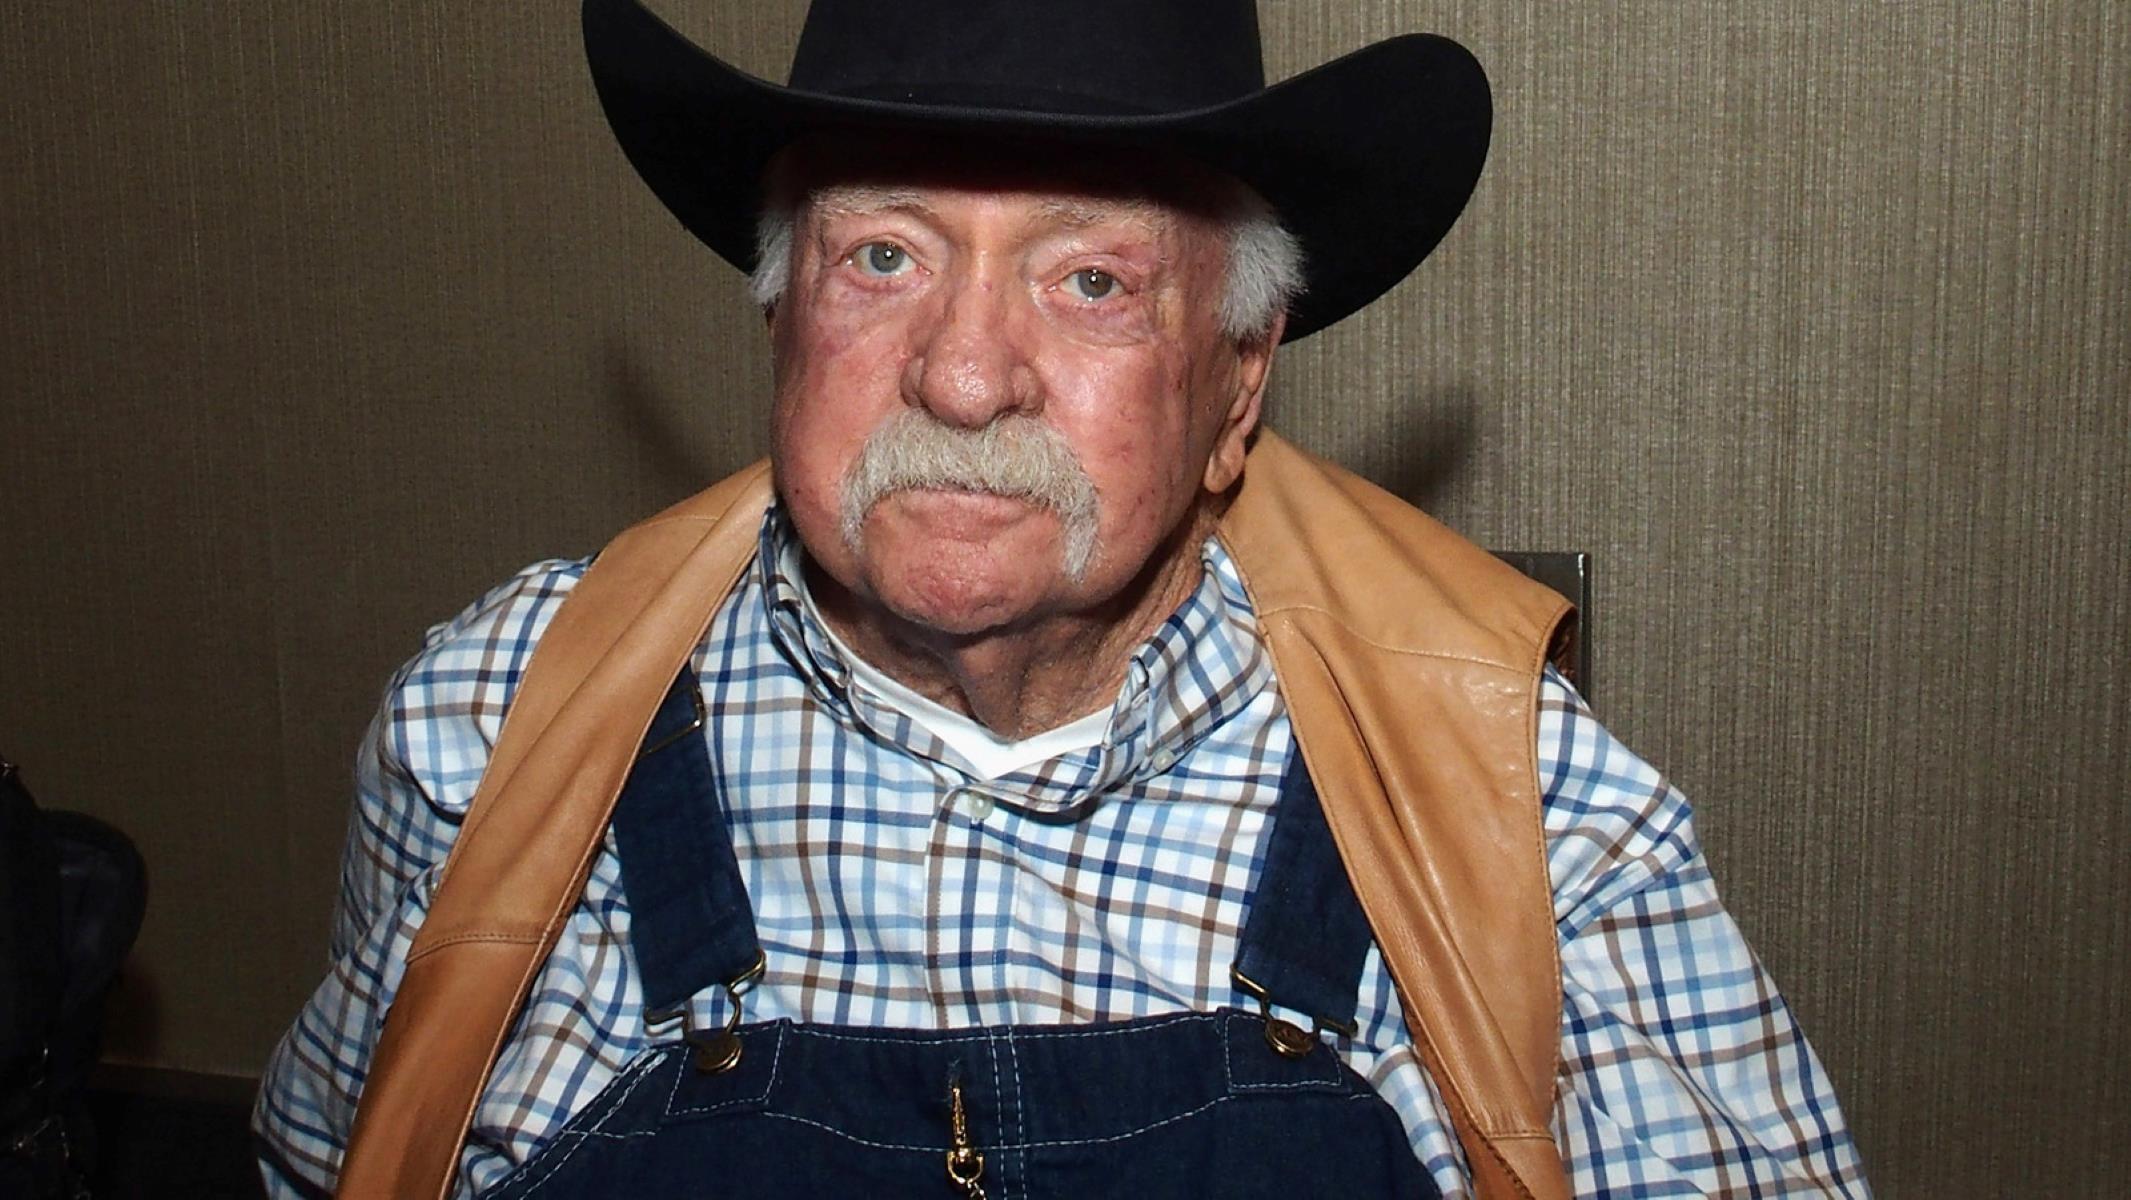 Fans Convinced They Spotted Wilford Brimley In ‘Yellowstone’ Despite His Absence